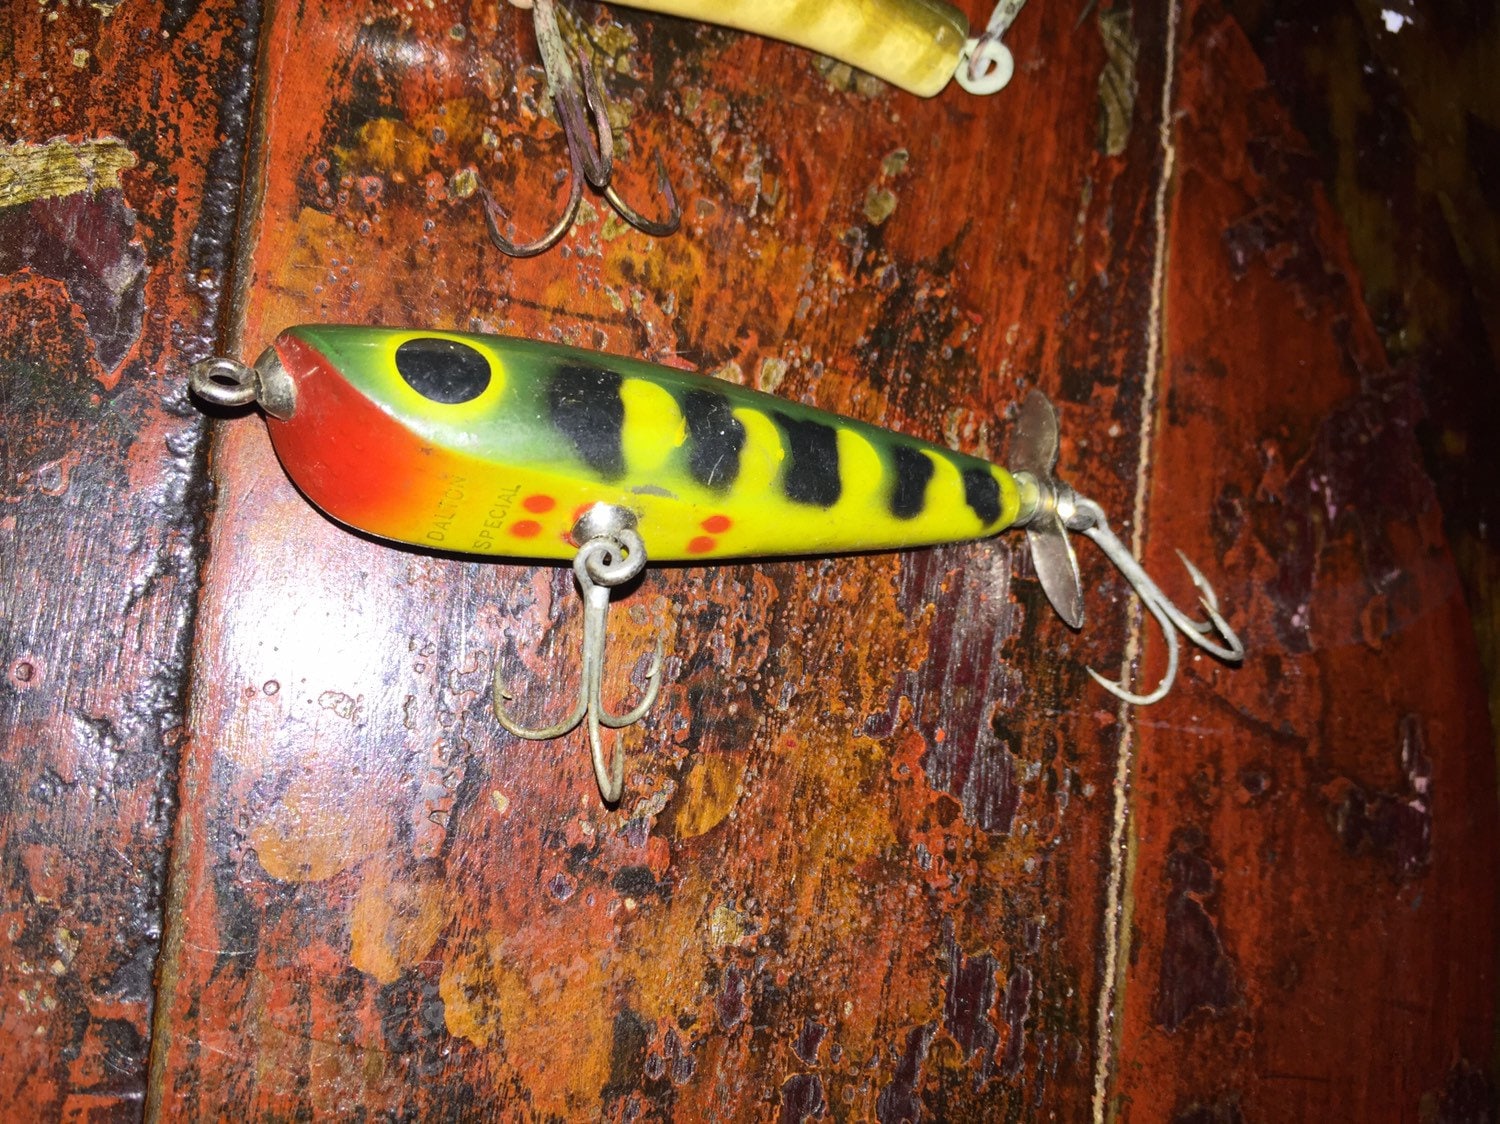 Set of 6 Antique/vintage Fishing Lures, Tackle, Gear, Freshwater, Saltwater,  Fishing, Folk Art, Handmade, Bait, Listing is for Set of Six -  Canada